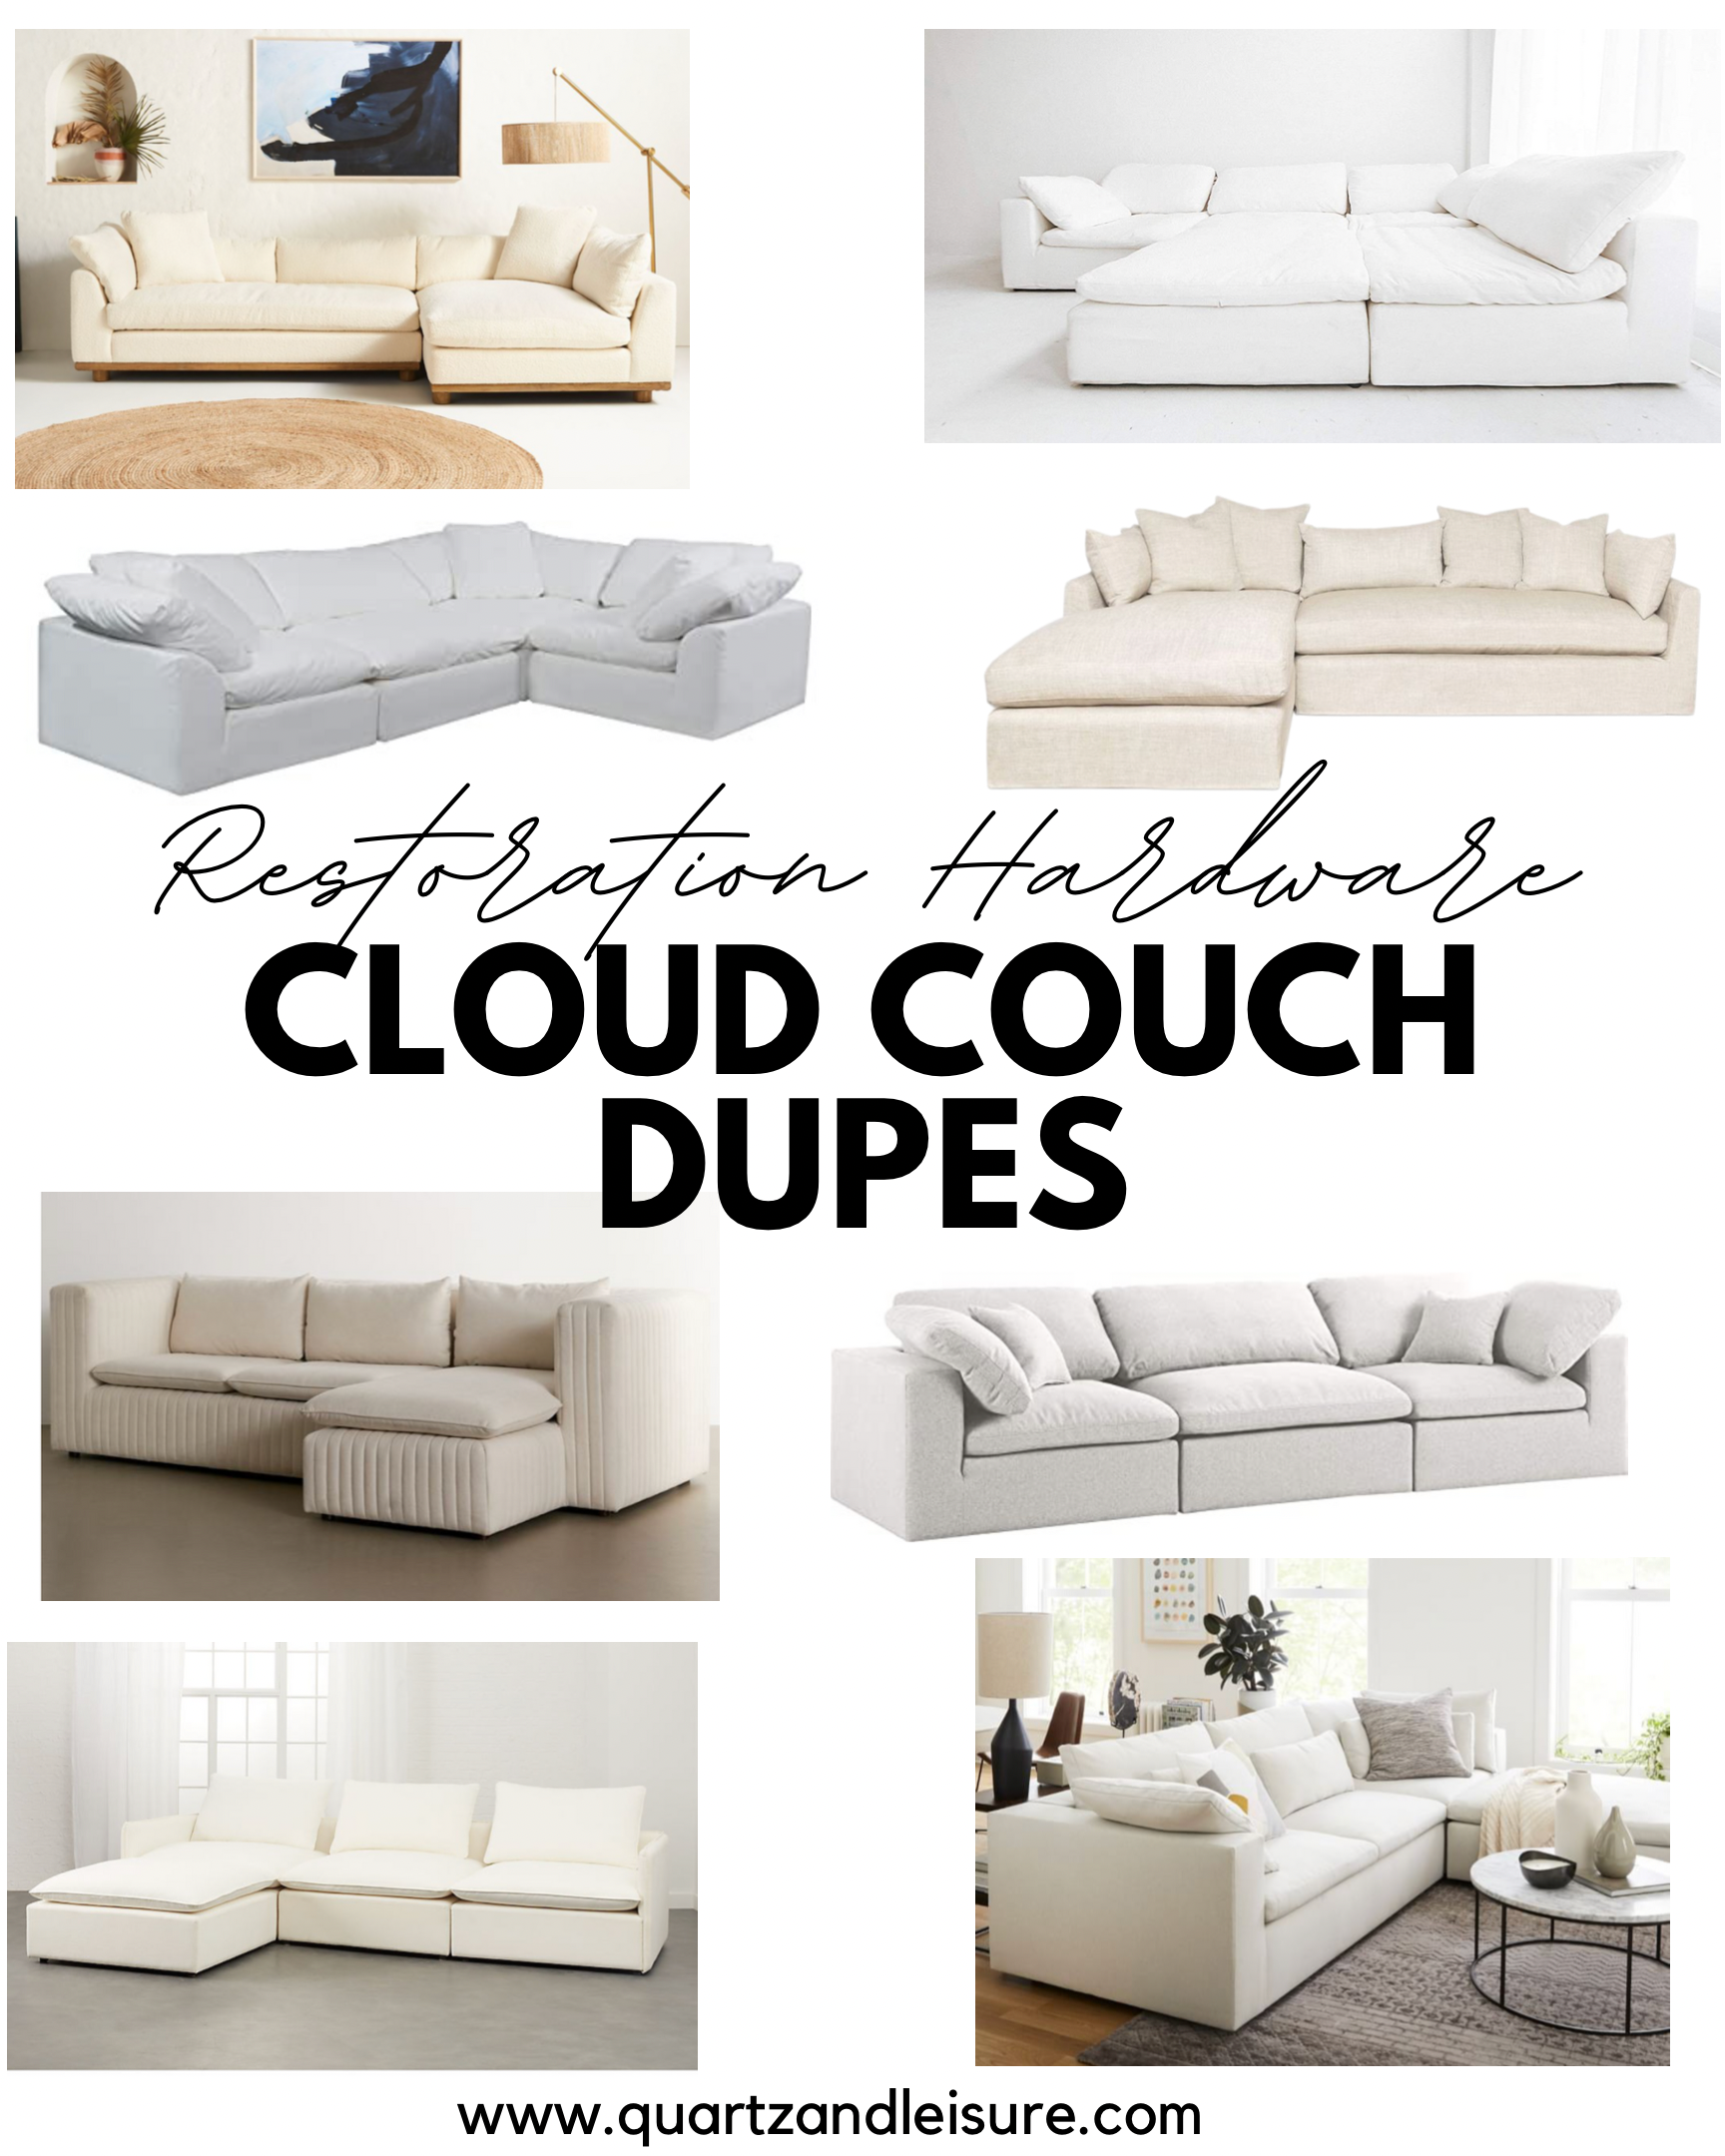 Restoration Hardware Cloud Couch Dupes